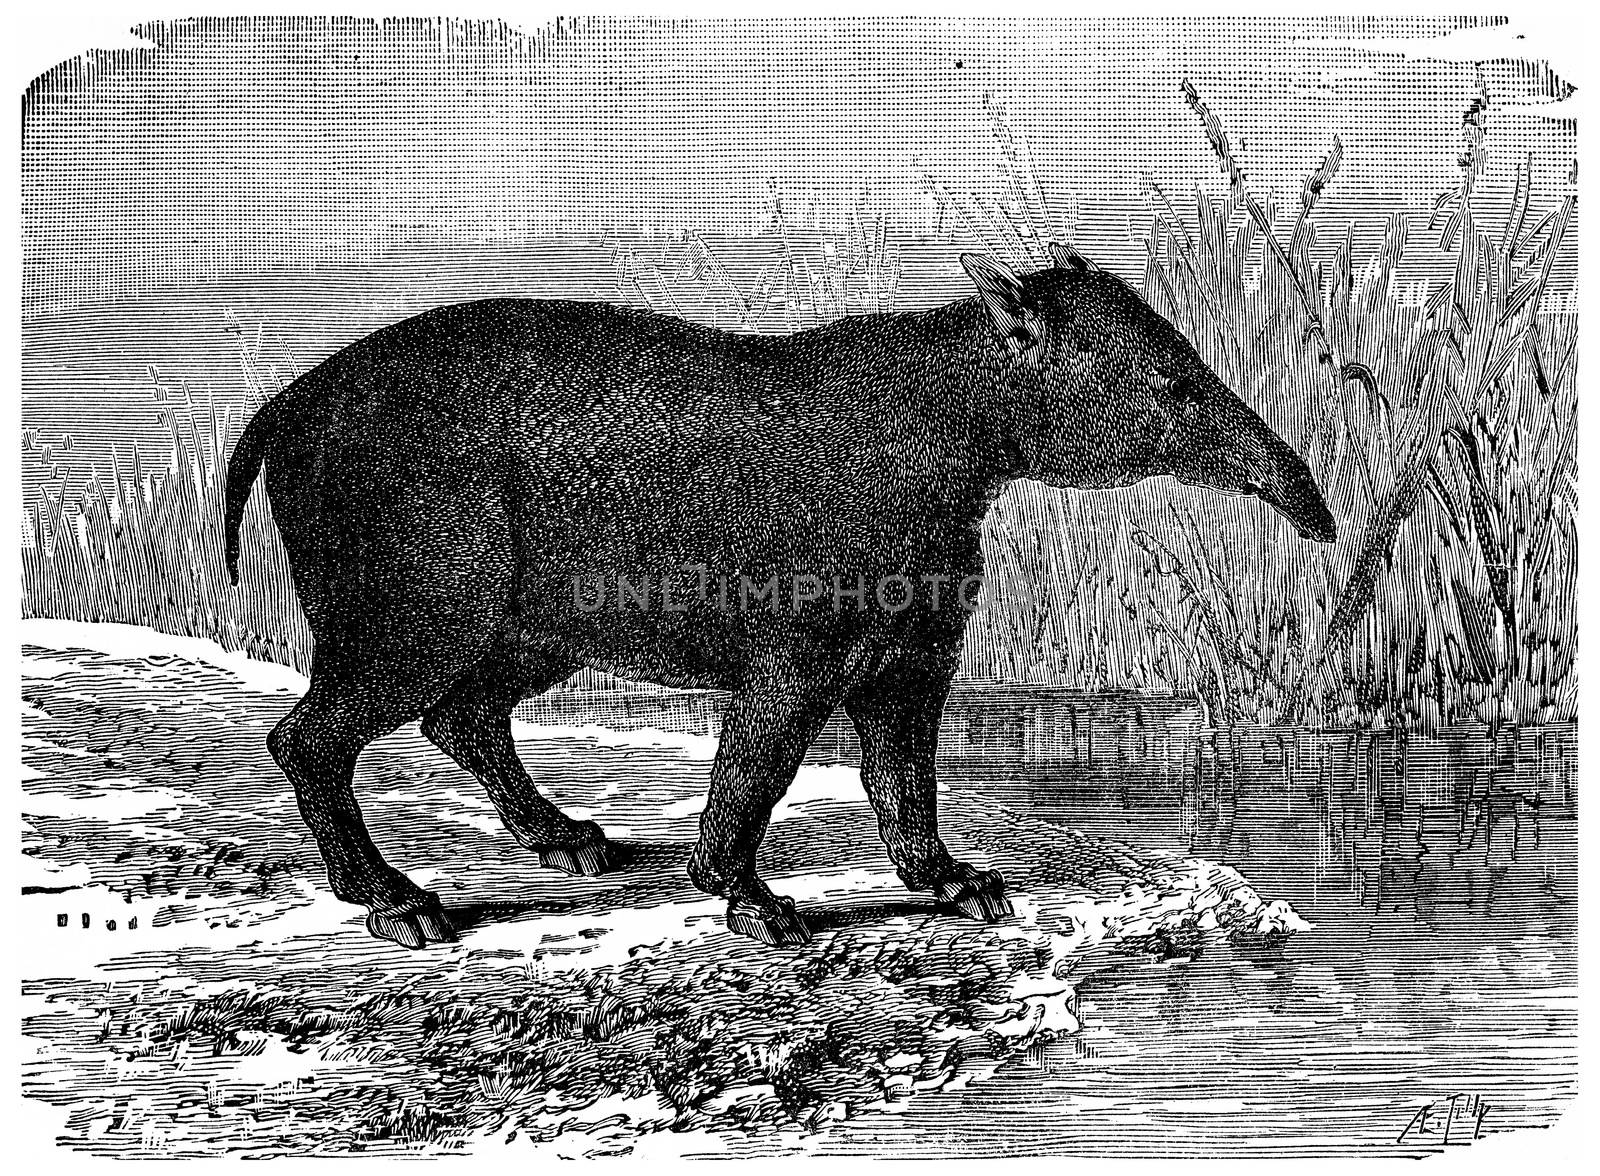 The great Paleotherium, mammal pachyderm of the Eocene period, vintage engraved illustration. Earth before man – 1886.